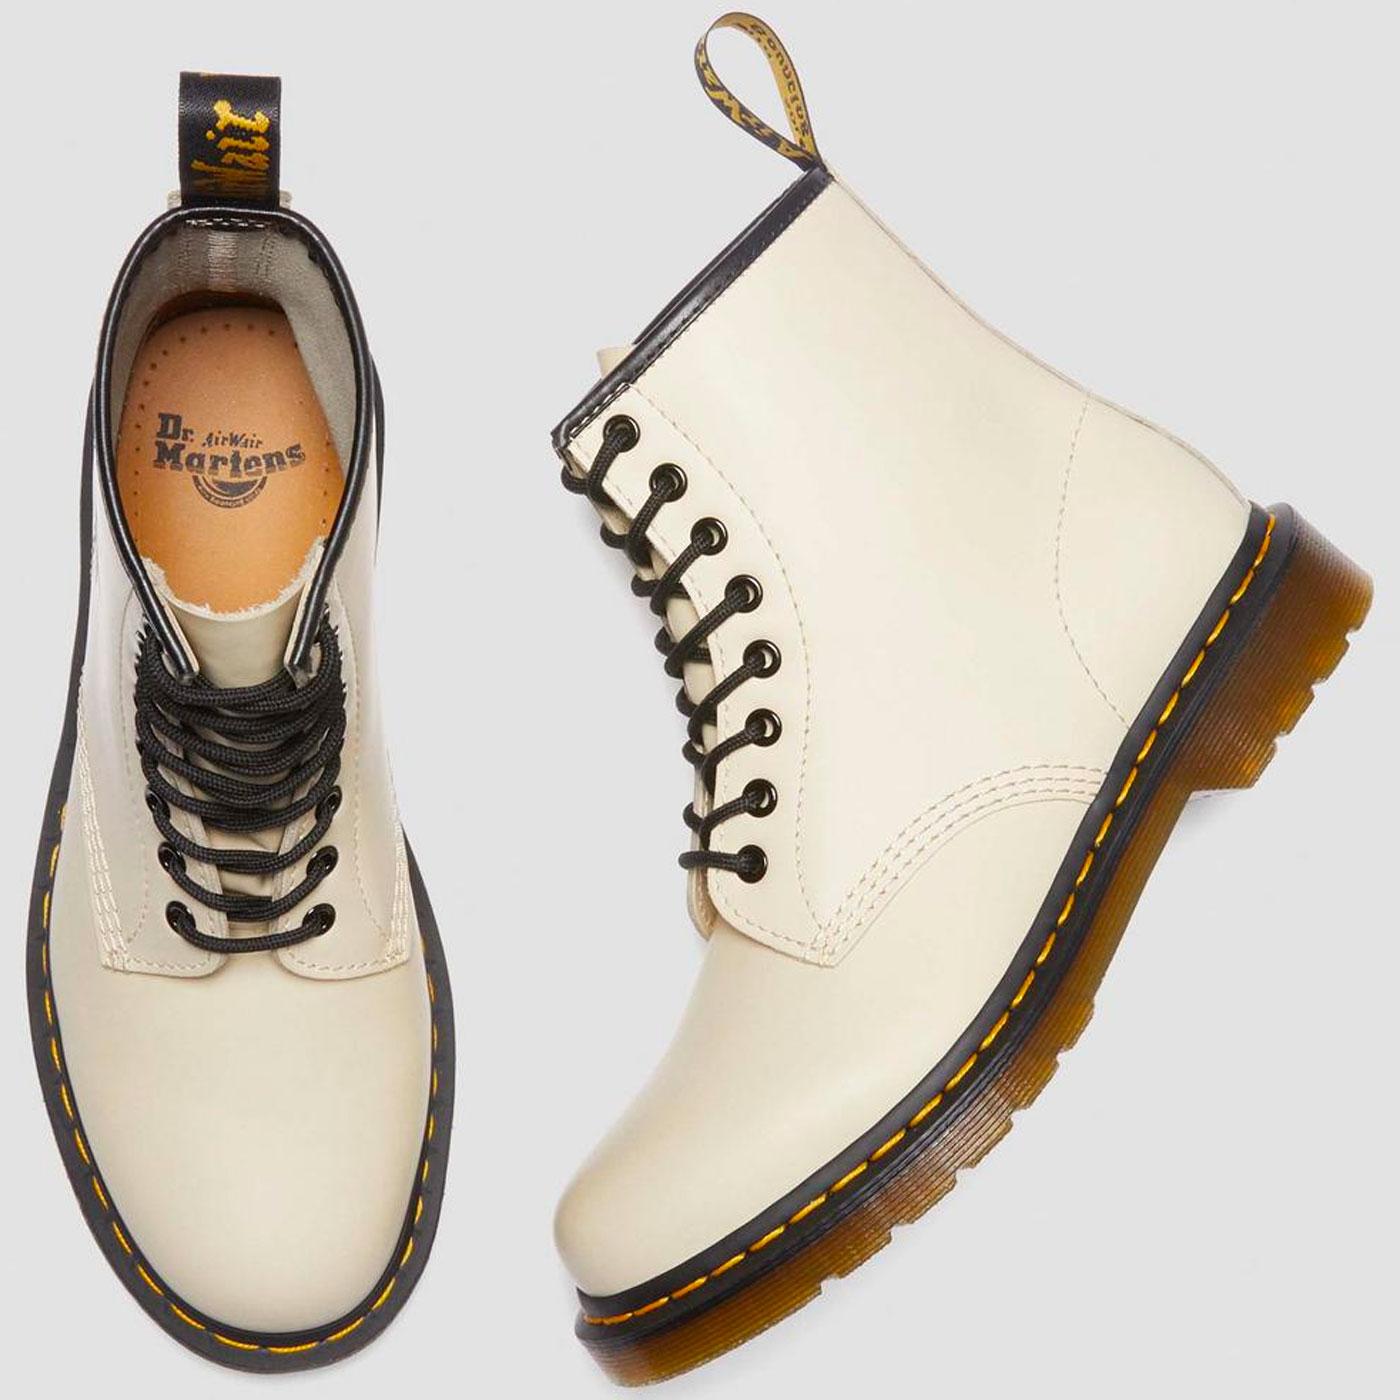 Dr Martens 1460 Smooth Leather Mod Boots in Parchment Beige